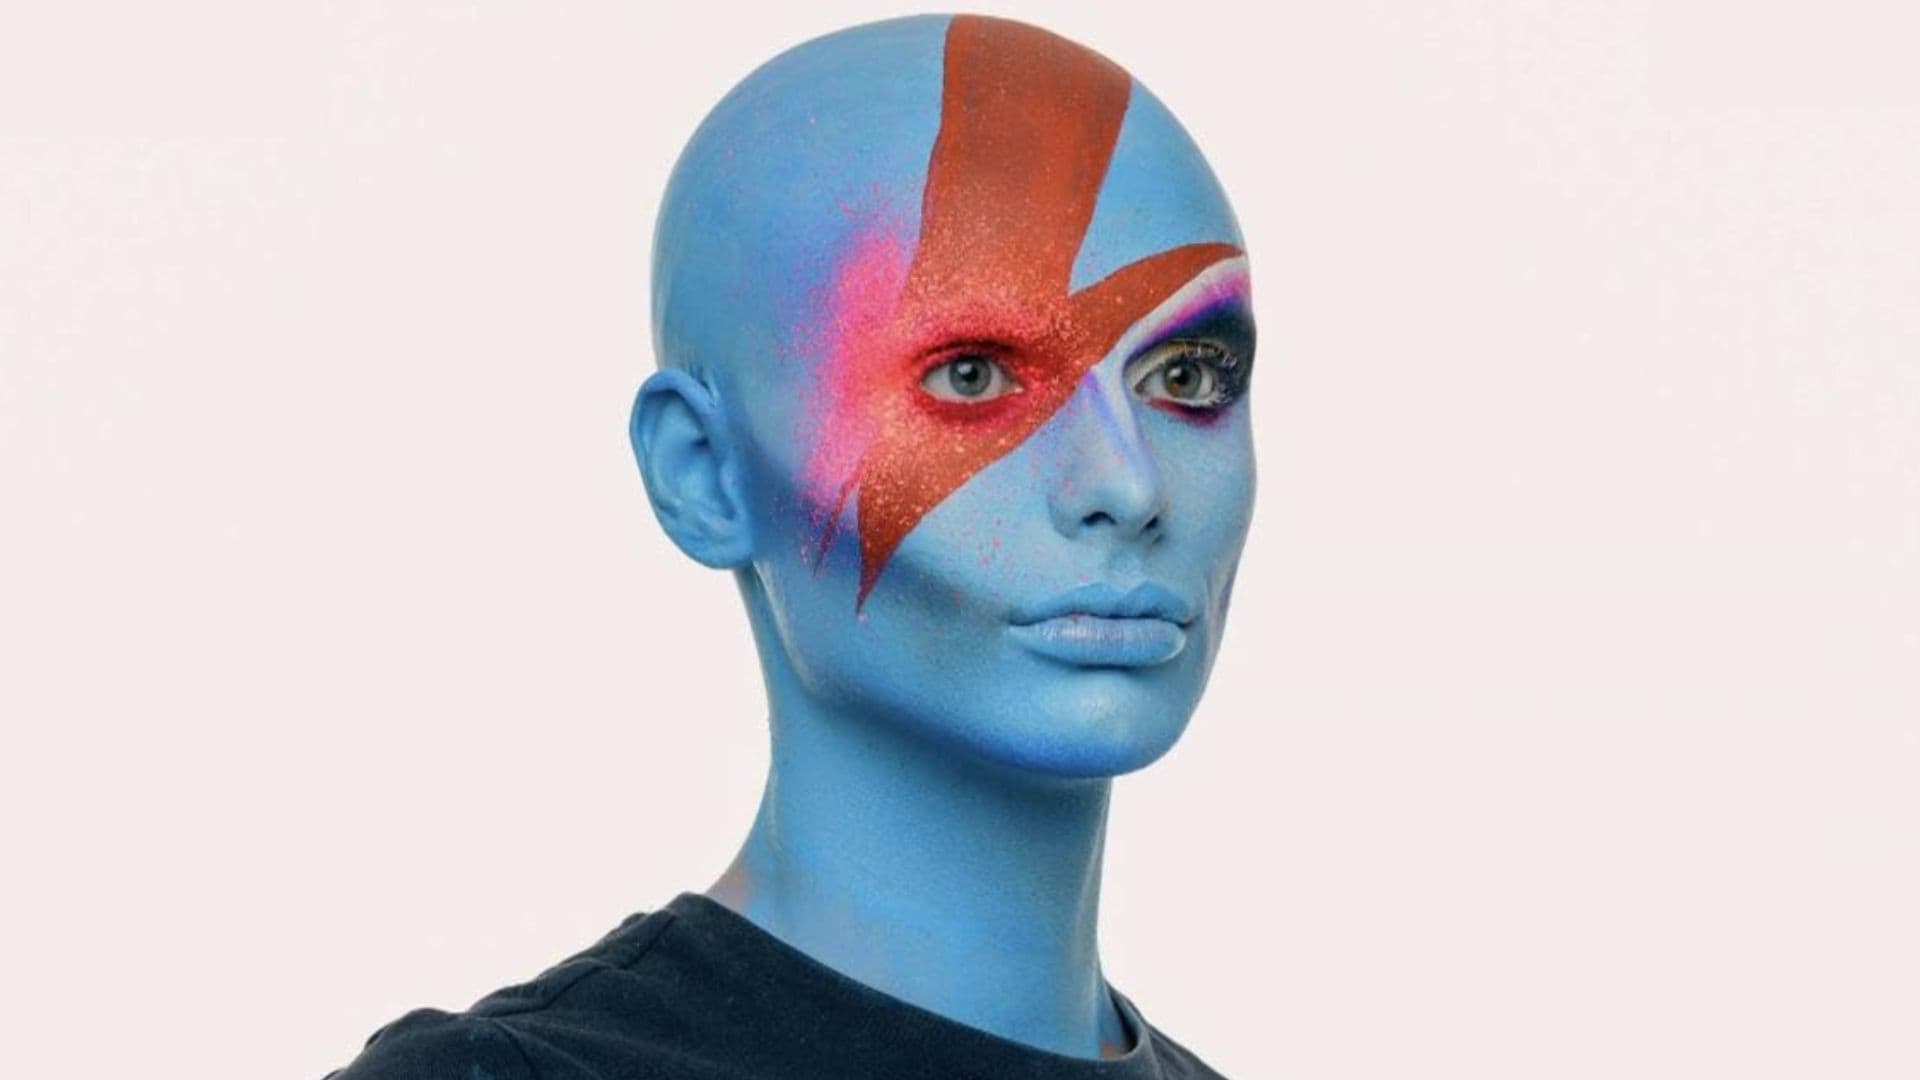 A model with blue face paint with red and pink details in this image from BBC Three.